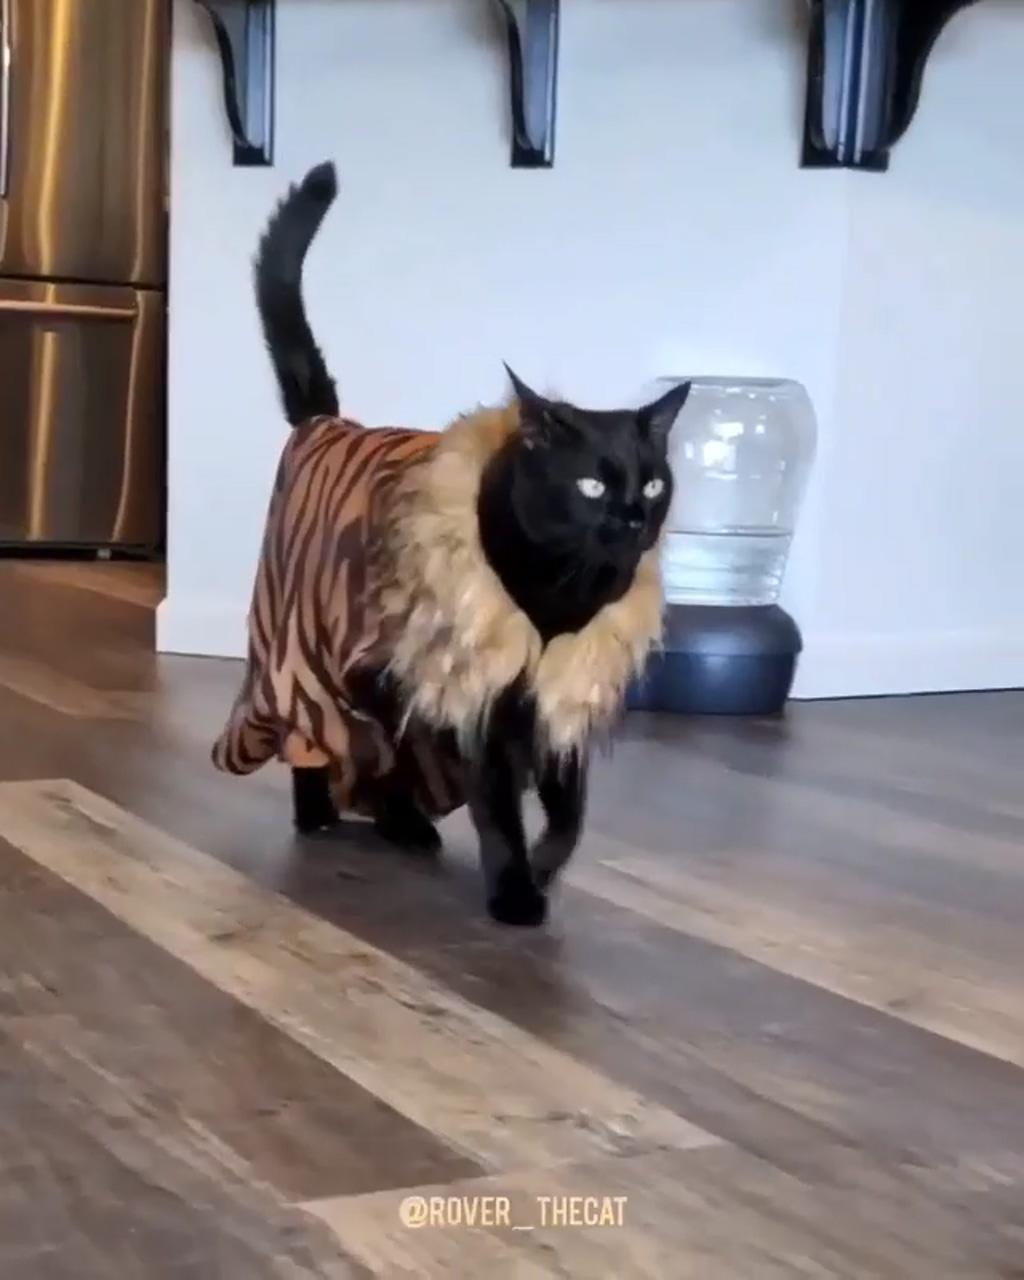 Cats fashion; i think your cat is broken   see more weird cat on my youtube channel